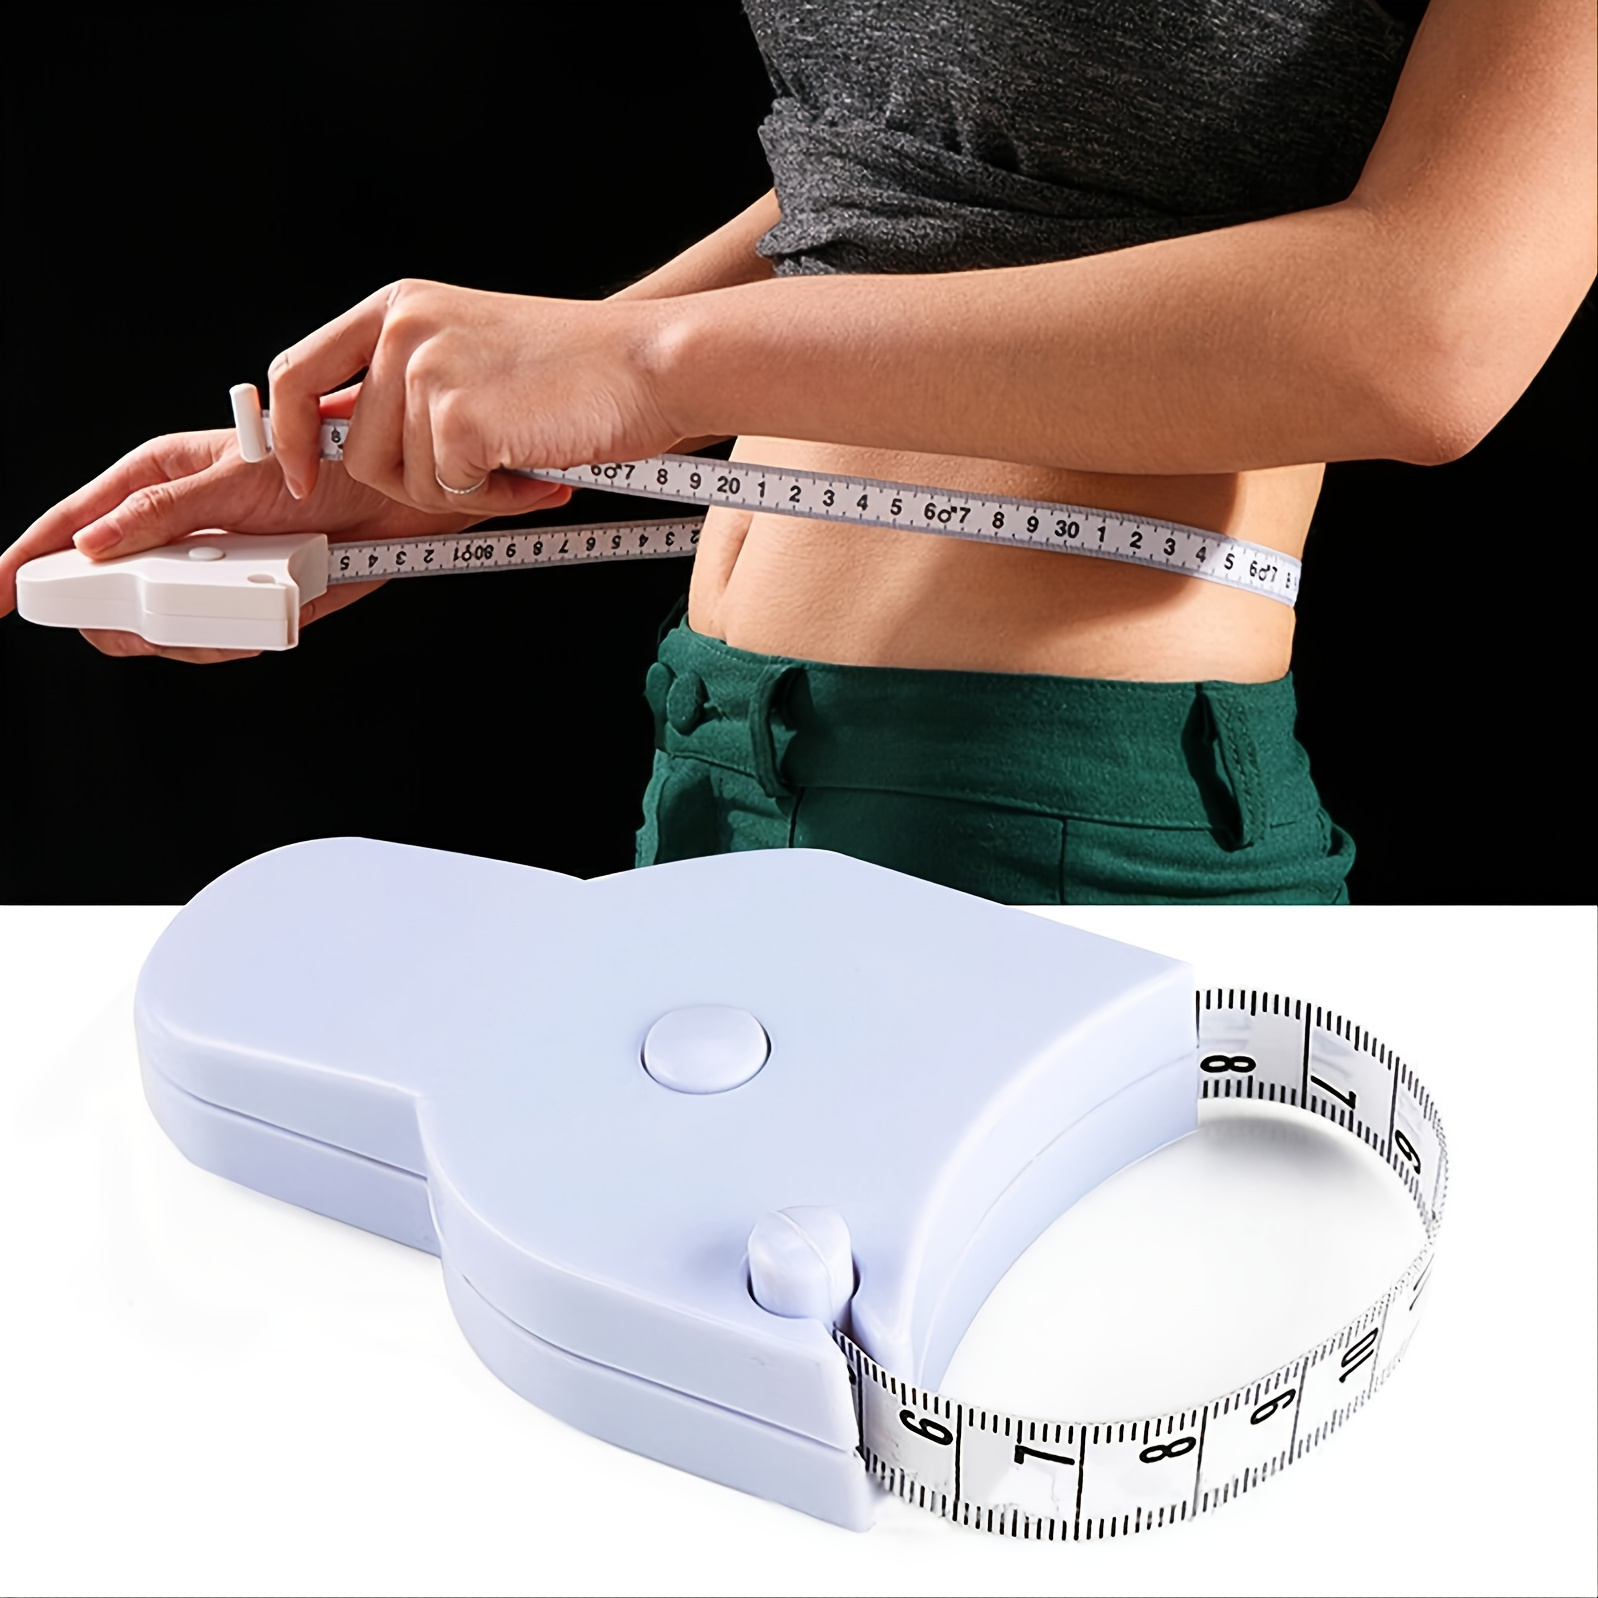 Body Tape Measure 60 Inch (150cm) - Retractable Measuring Tape for Body  Accurate Way to Track Weight Loss Muscle Gain by One Hand, Easy Body Tape